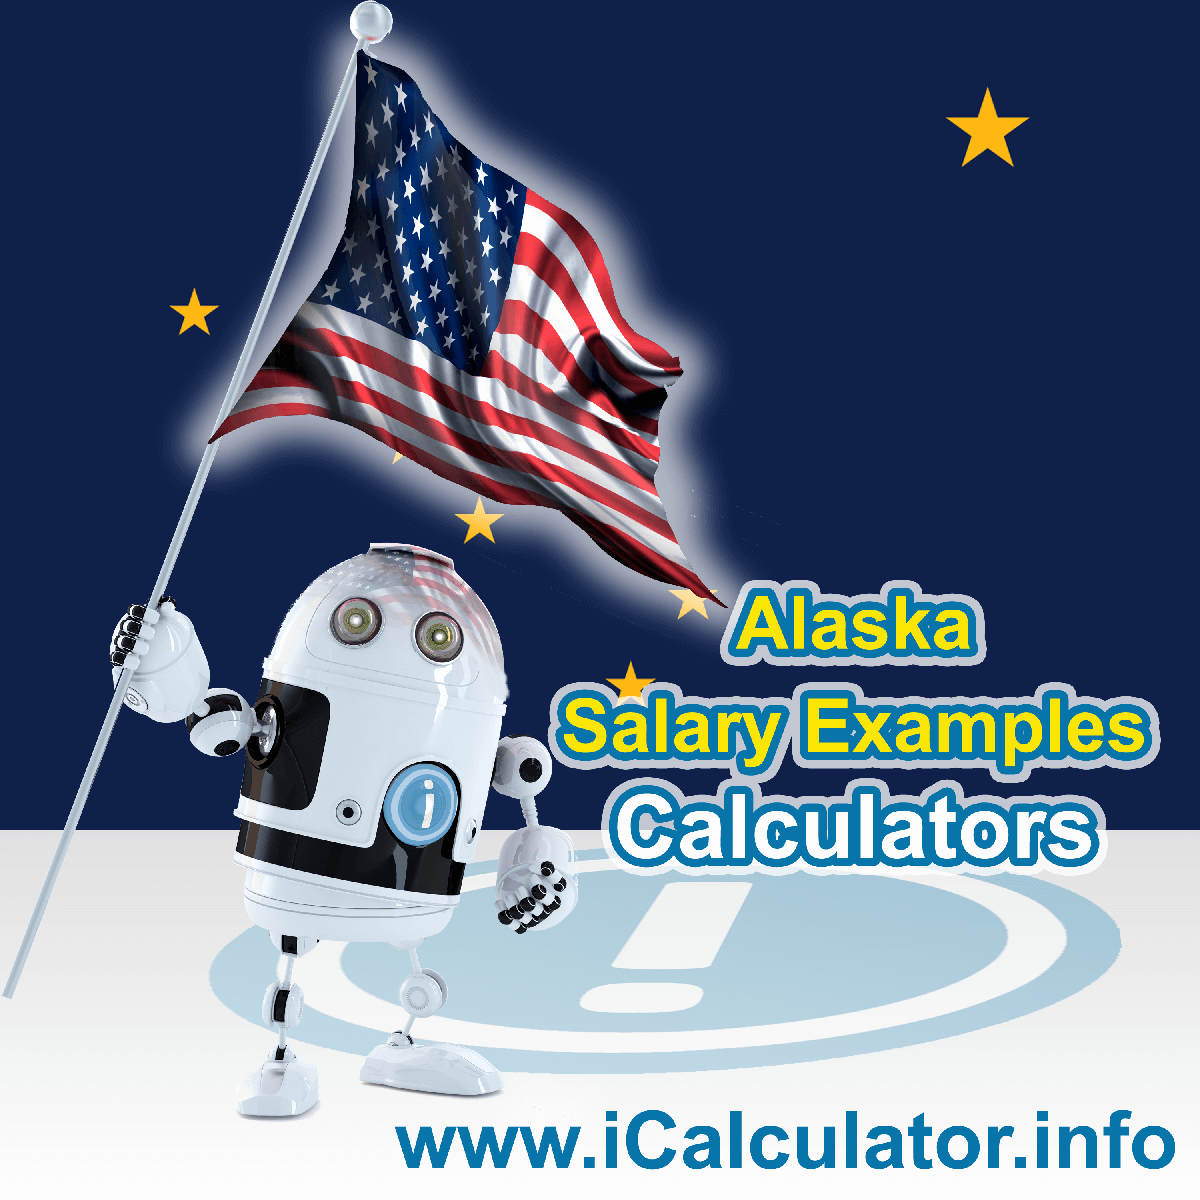 Alaska Salary Example for $ 155,000.00 in 2023 | iCalculator™ | $ 155,000.00 salary example for employee and employer paying Alaska State tincome taxes. Detailed salary after tax calculation including Alaska State Tax, Federal State Tax, Medicare Deductions, Social Security, Capital Gains and other income tax and salary deductions complete with supporting Alaska state tax tables 